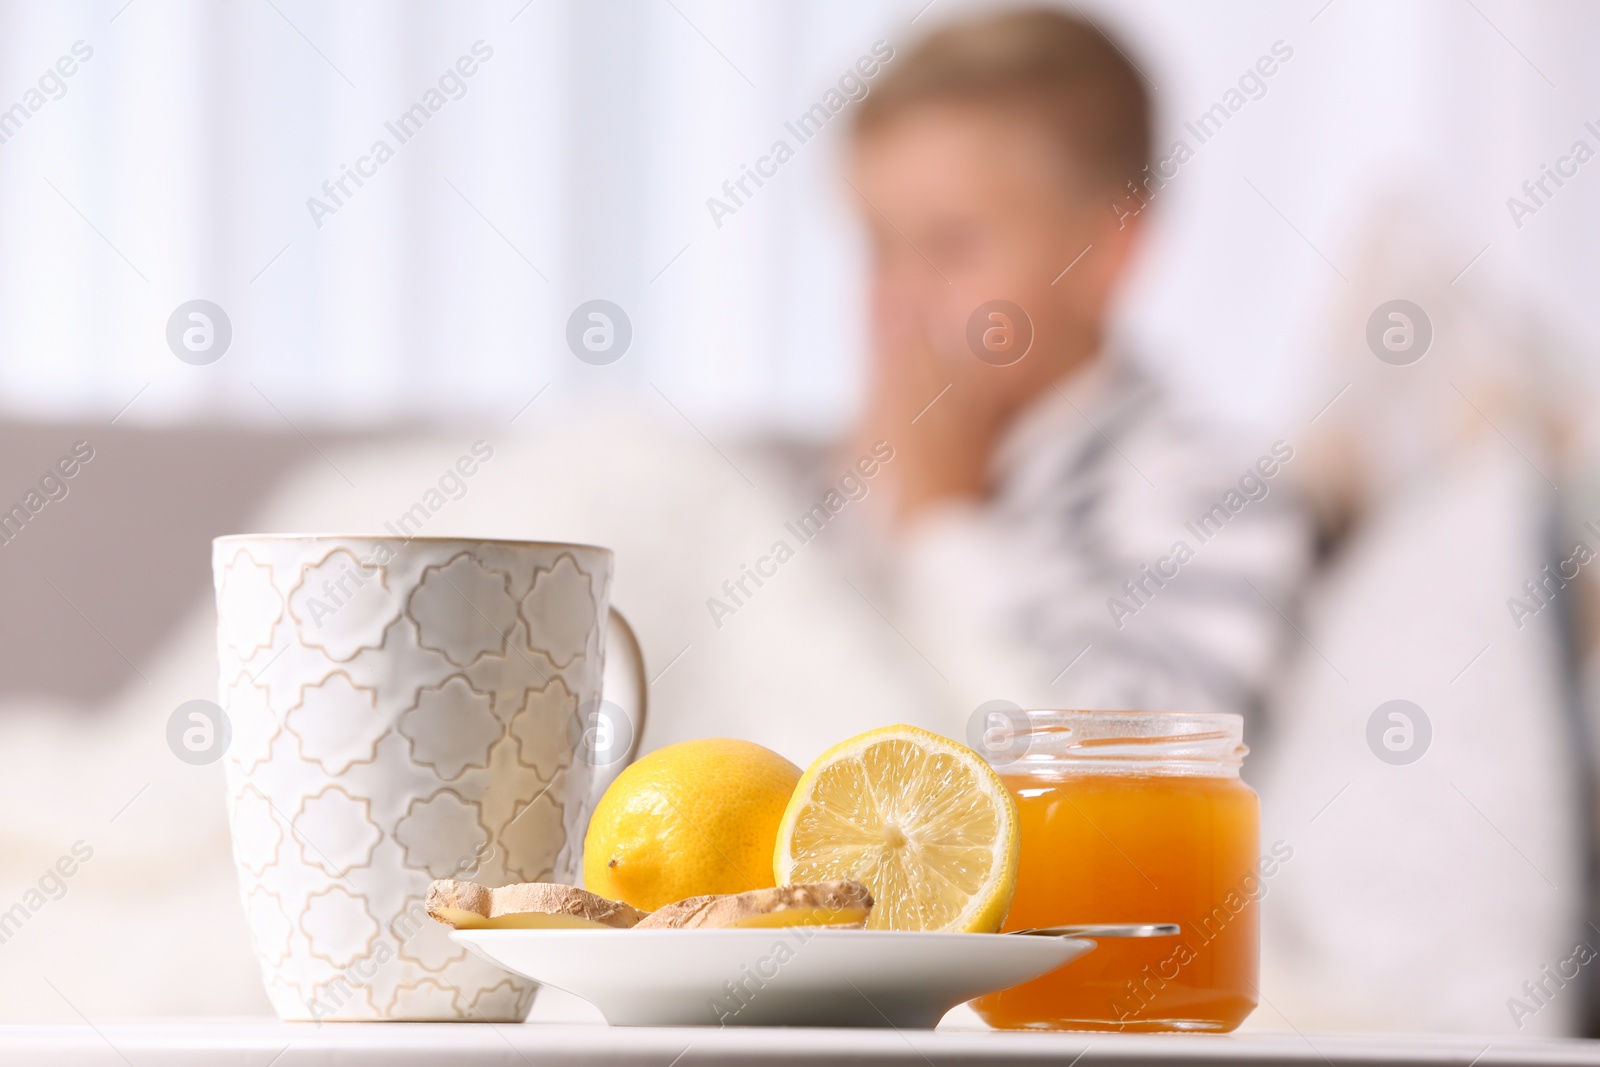 Photo of Cough remedies and ill little boy on background